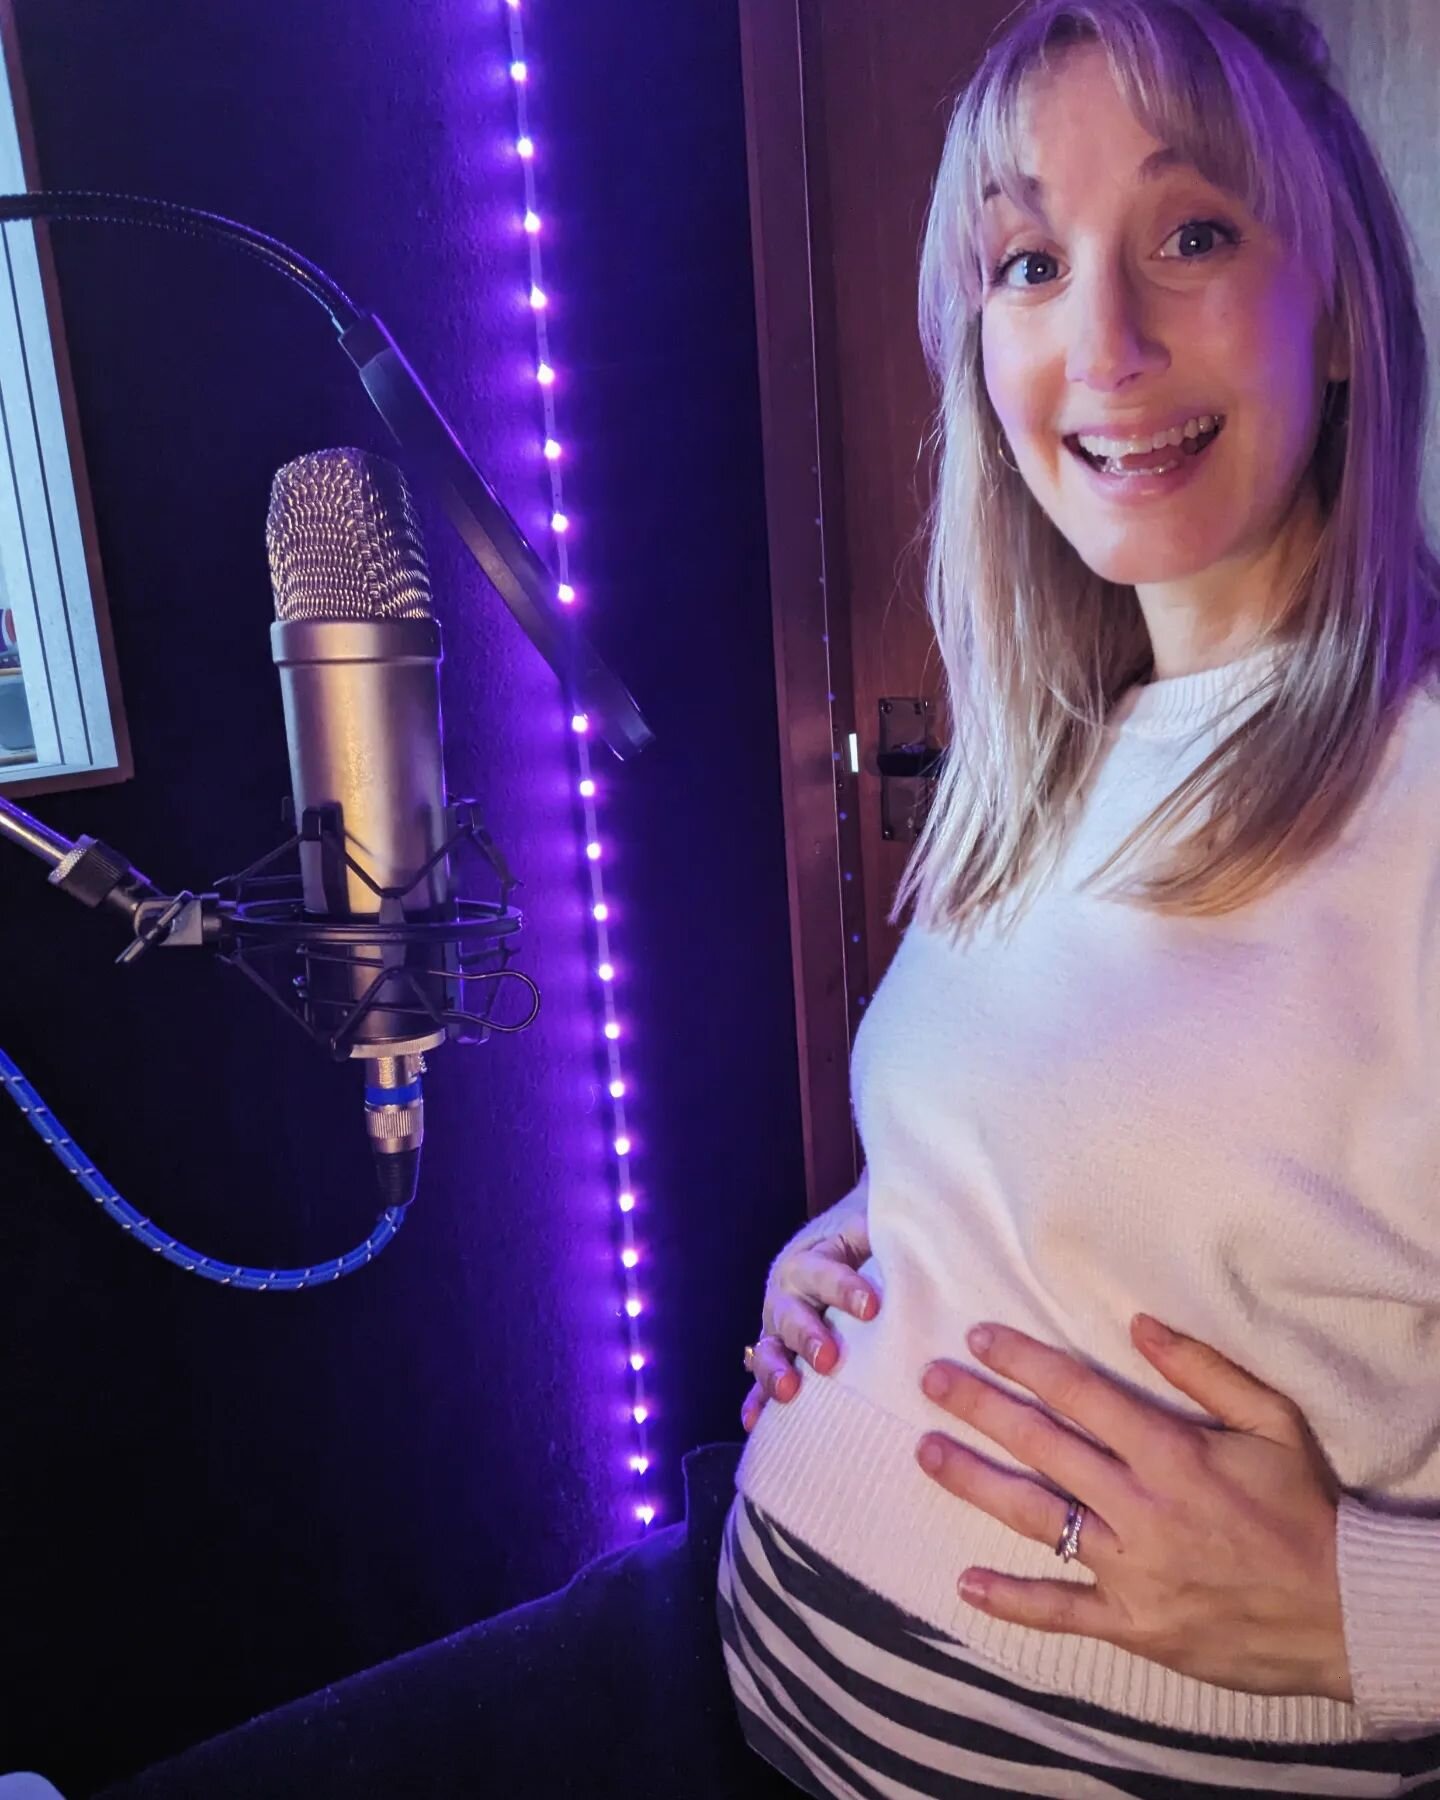 Two thirds of my way through production on this &quot;long term project!&quot; 🐣 Very excited to share that we're expecting a little girl around February 😊

In the meantime, come take advantage of my VO pregnancy super powers while they last! 

⚡ Y